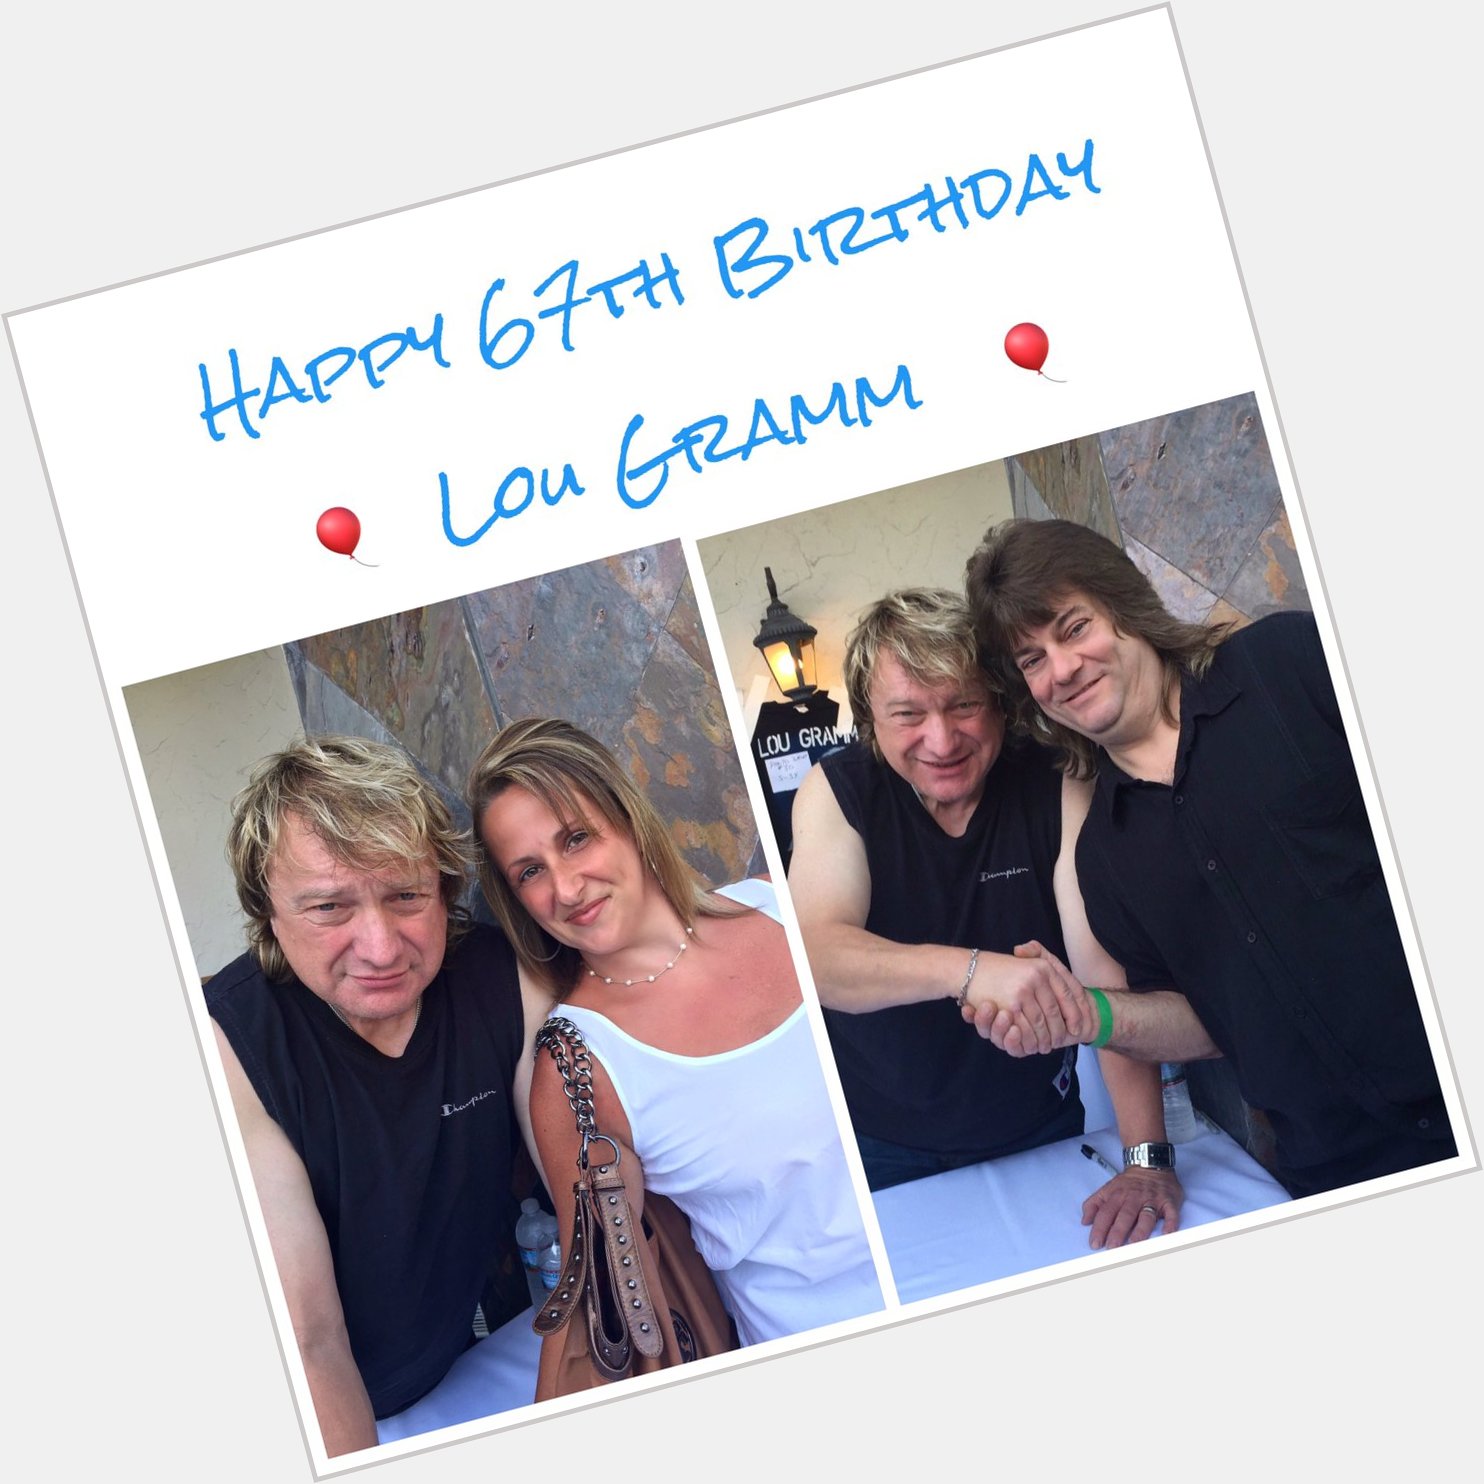 Happy & Healthy Birthday to Mr Lou Gramm ... wishing you many more       